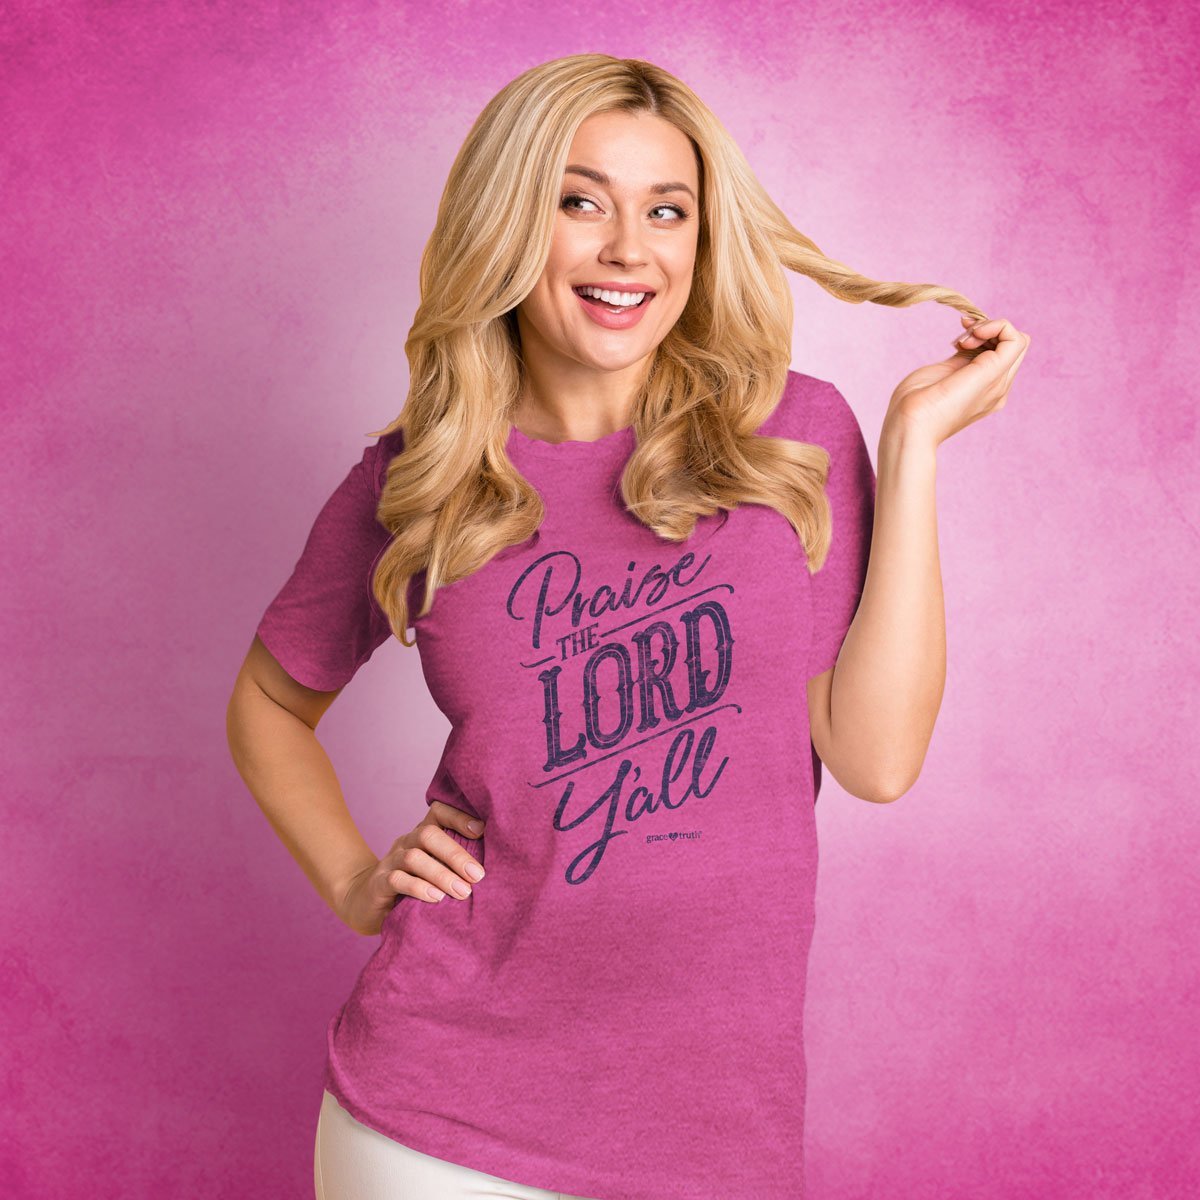 Cherished Girl Grace & Truth Praise the Lord Y'all Girlie Christian Bright T Shirt